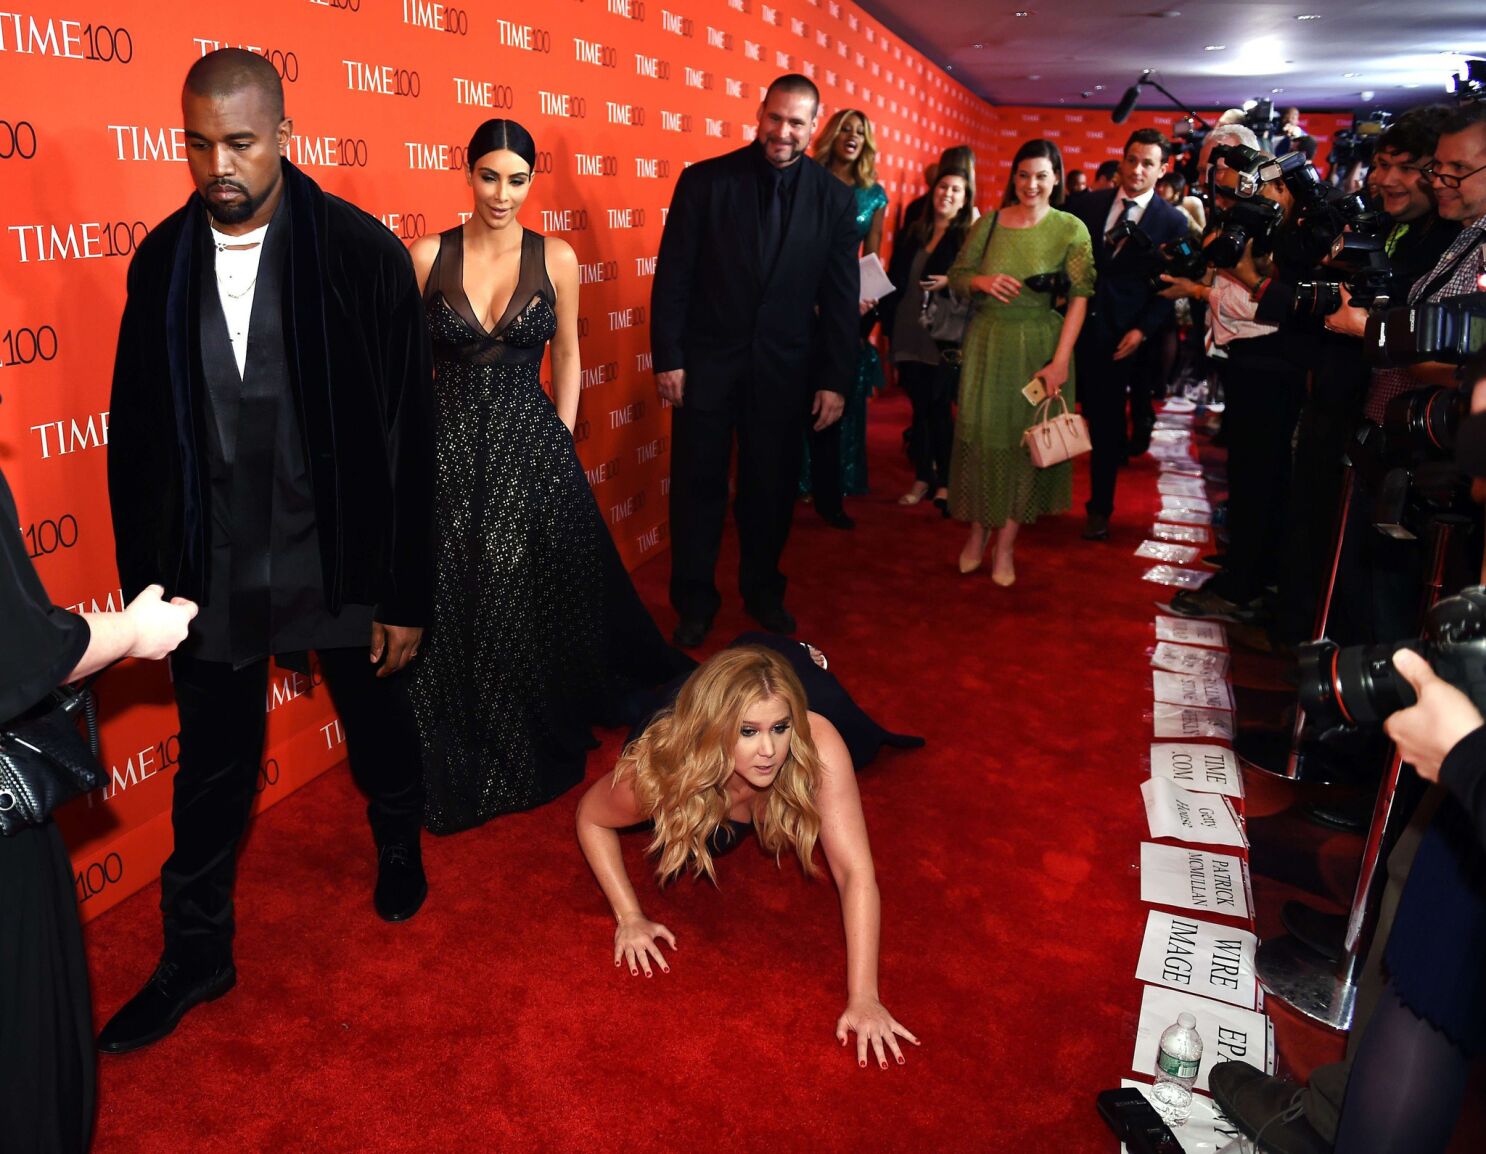 Amy Schumer hails Kimye on carpet by faking major fall at Time 100 gala - Los Angeles Times